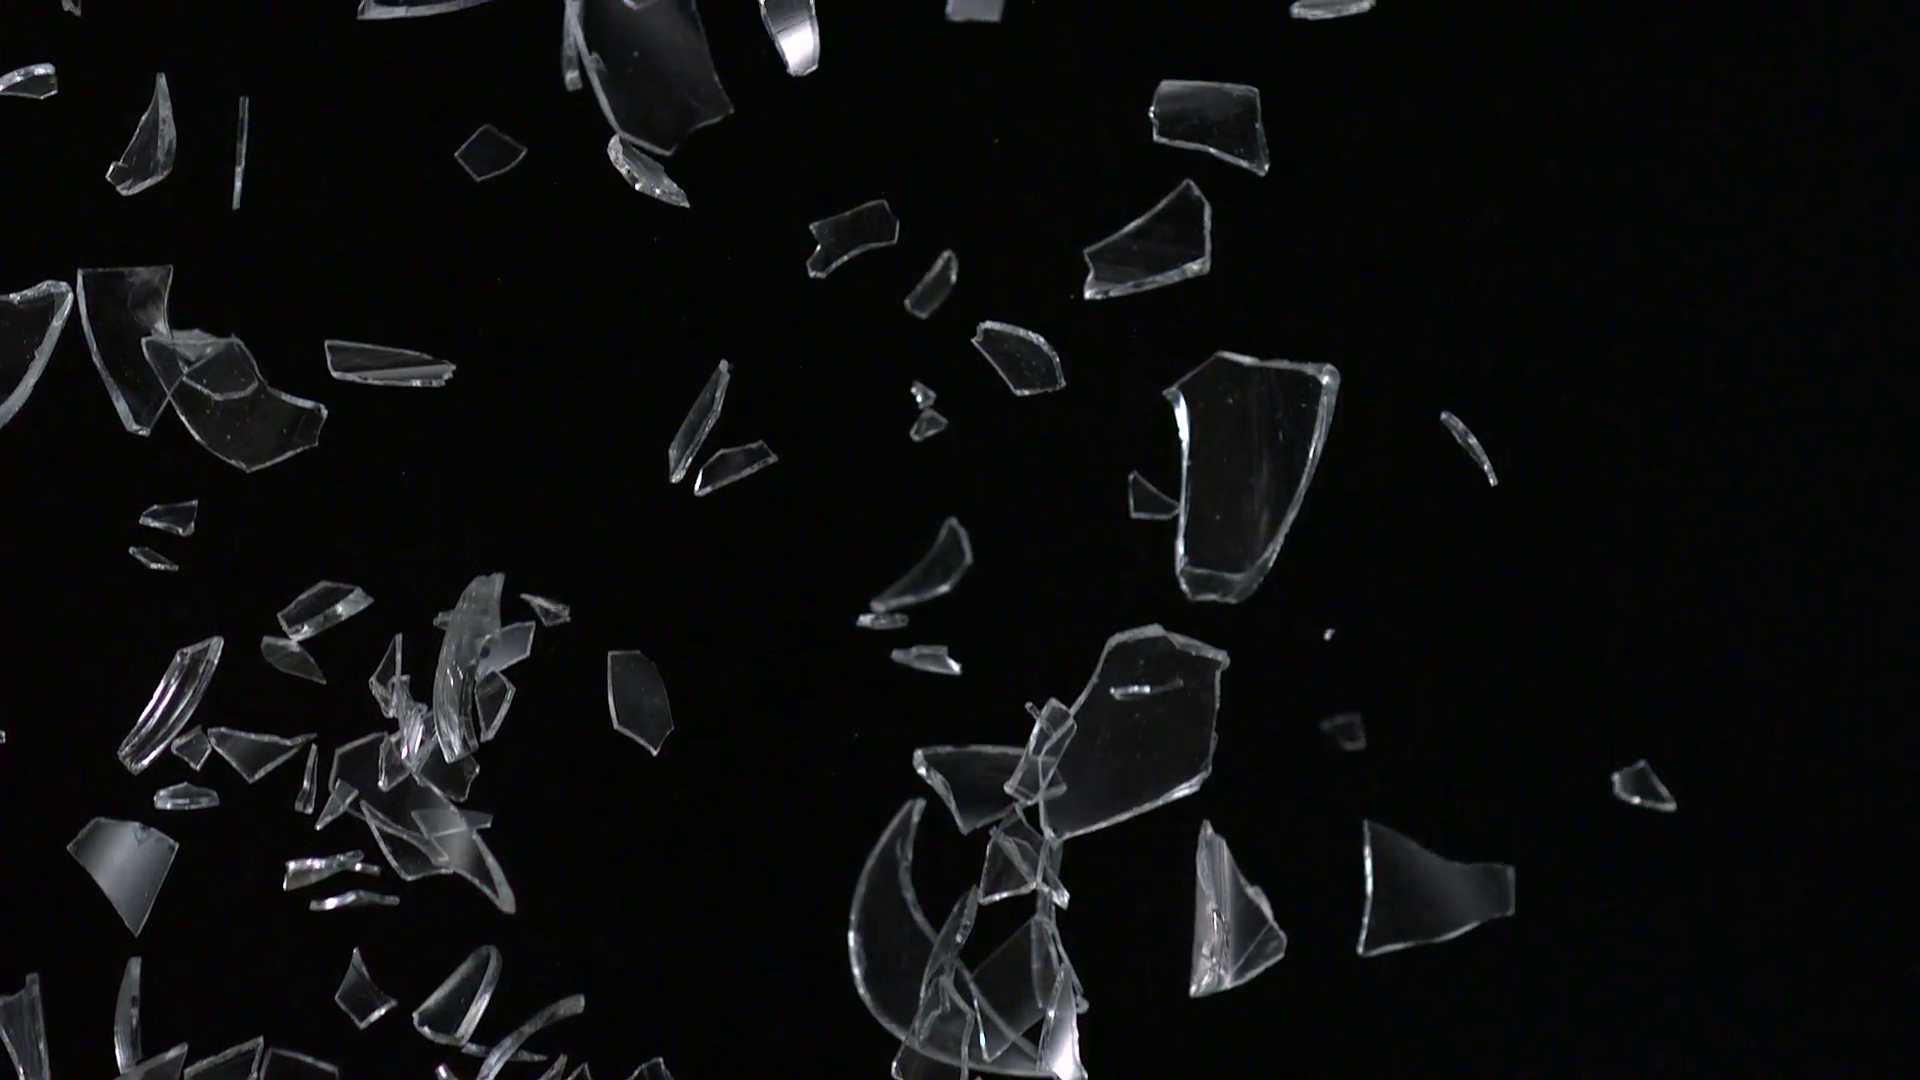 shattered glass falling, Slow Motion Stock Video Footage - Videoblocks